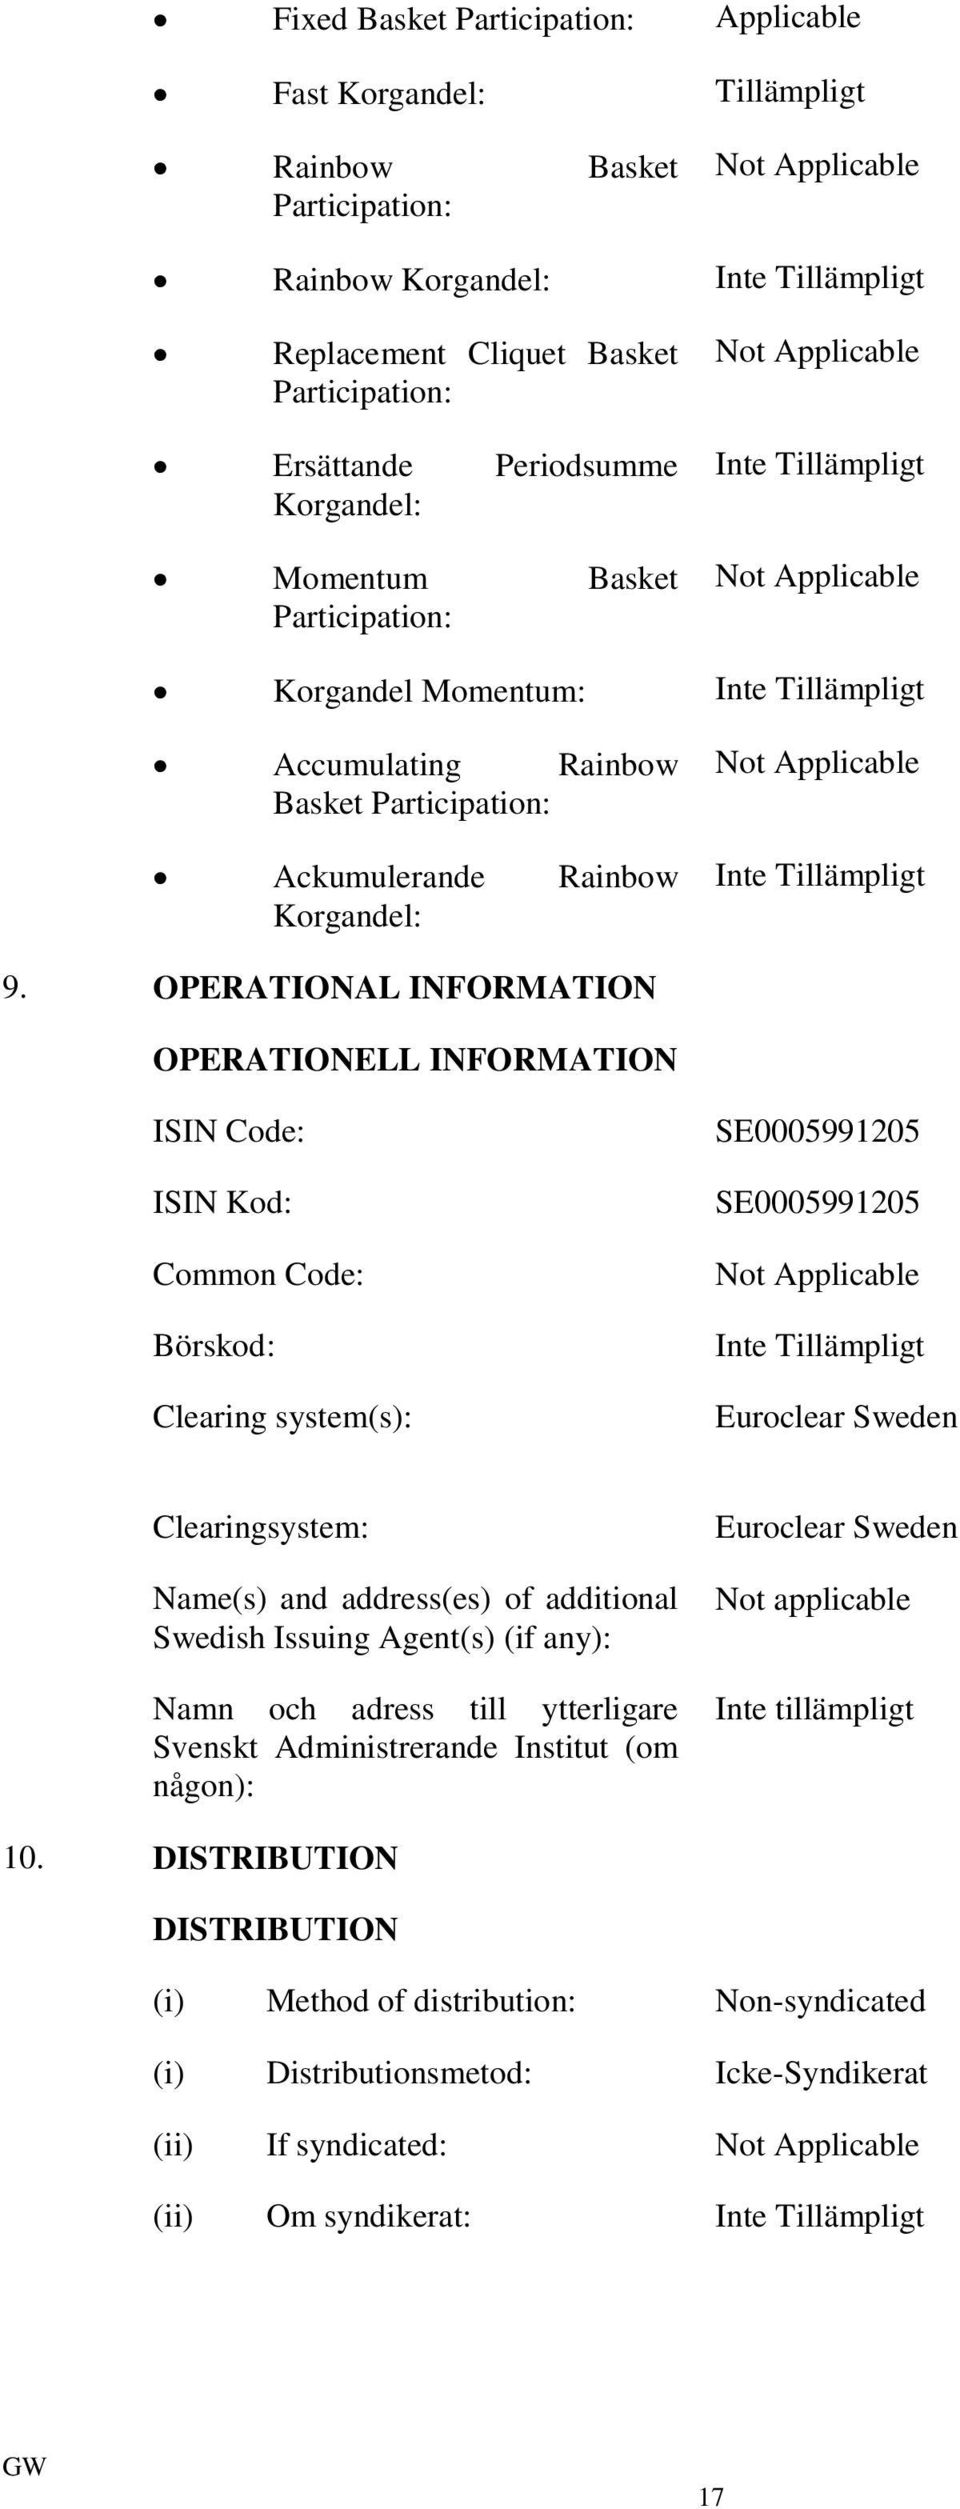 OPERATIONAL INFORMATION OPERATIONELL INFORMATION ISIN Code: ISIN Kod: Common Code: Börskod: Clearing system(s): SE0005991205 SE0005991205 Not Applicable Euroclear Sweden Clearingsystem: Name(s) and